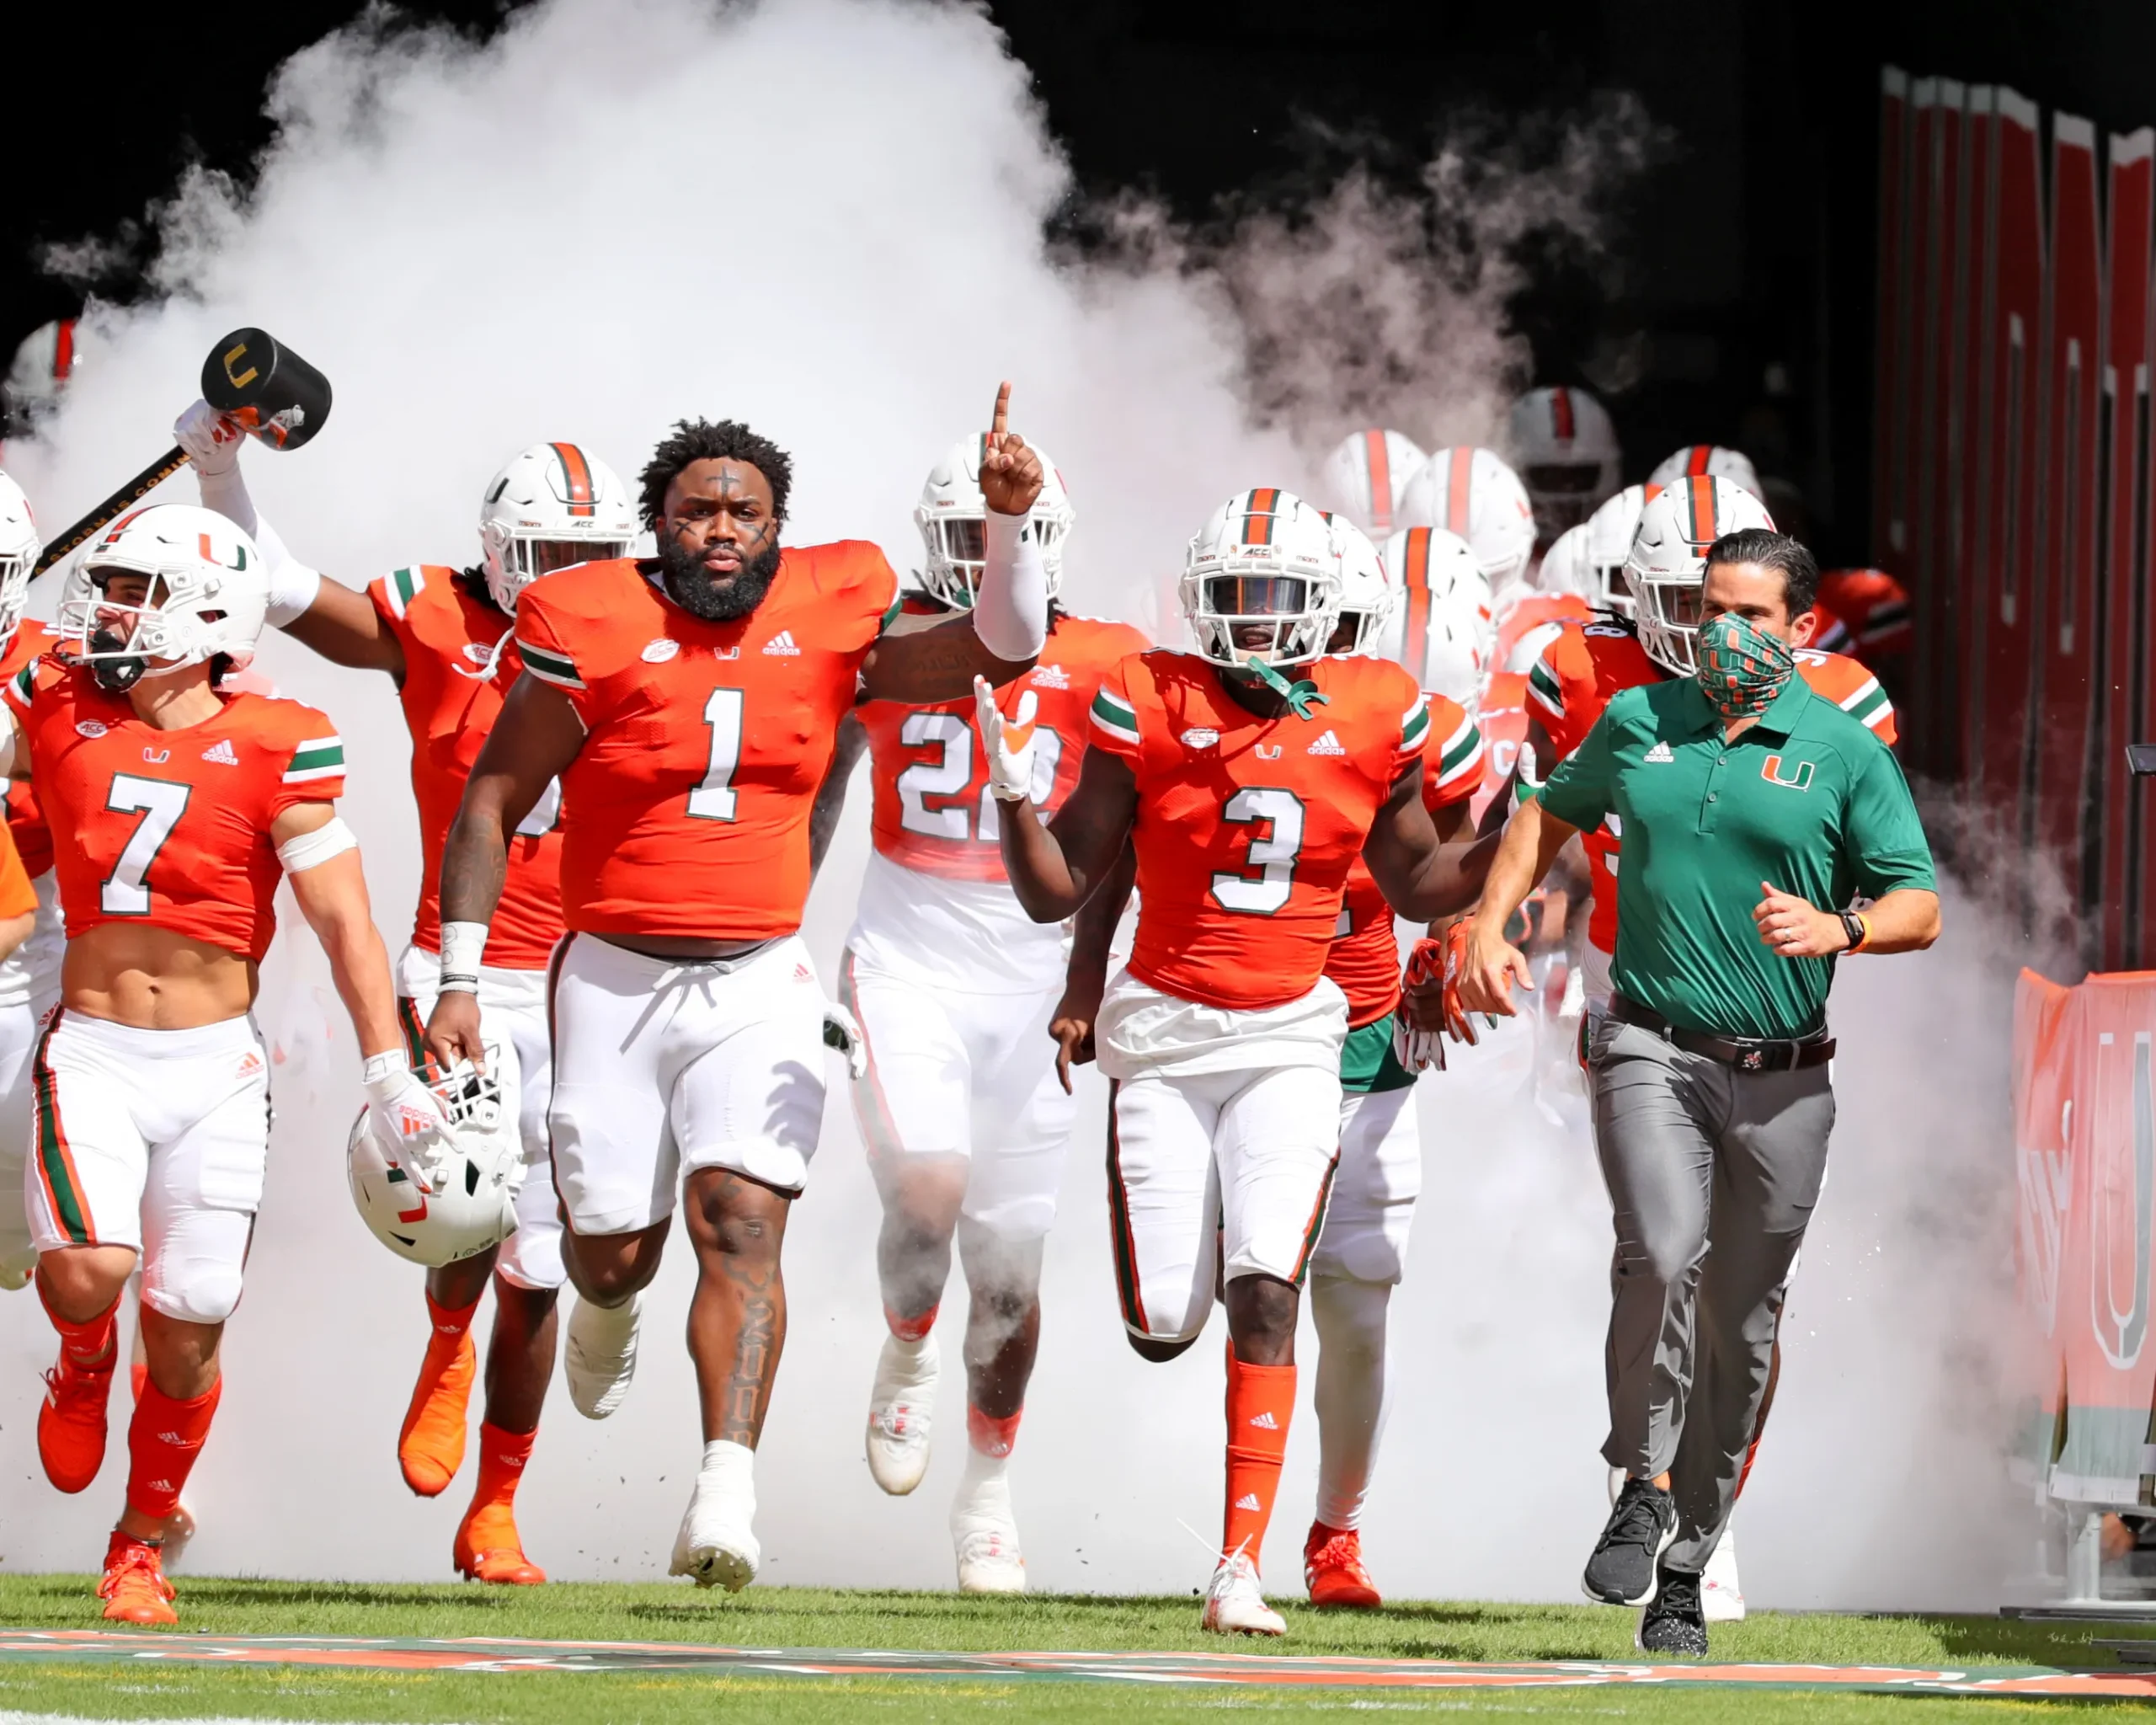 DONE DEAL: Miami Hurricanes adds two incredible talent to their roster as they approach the national signing day…